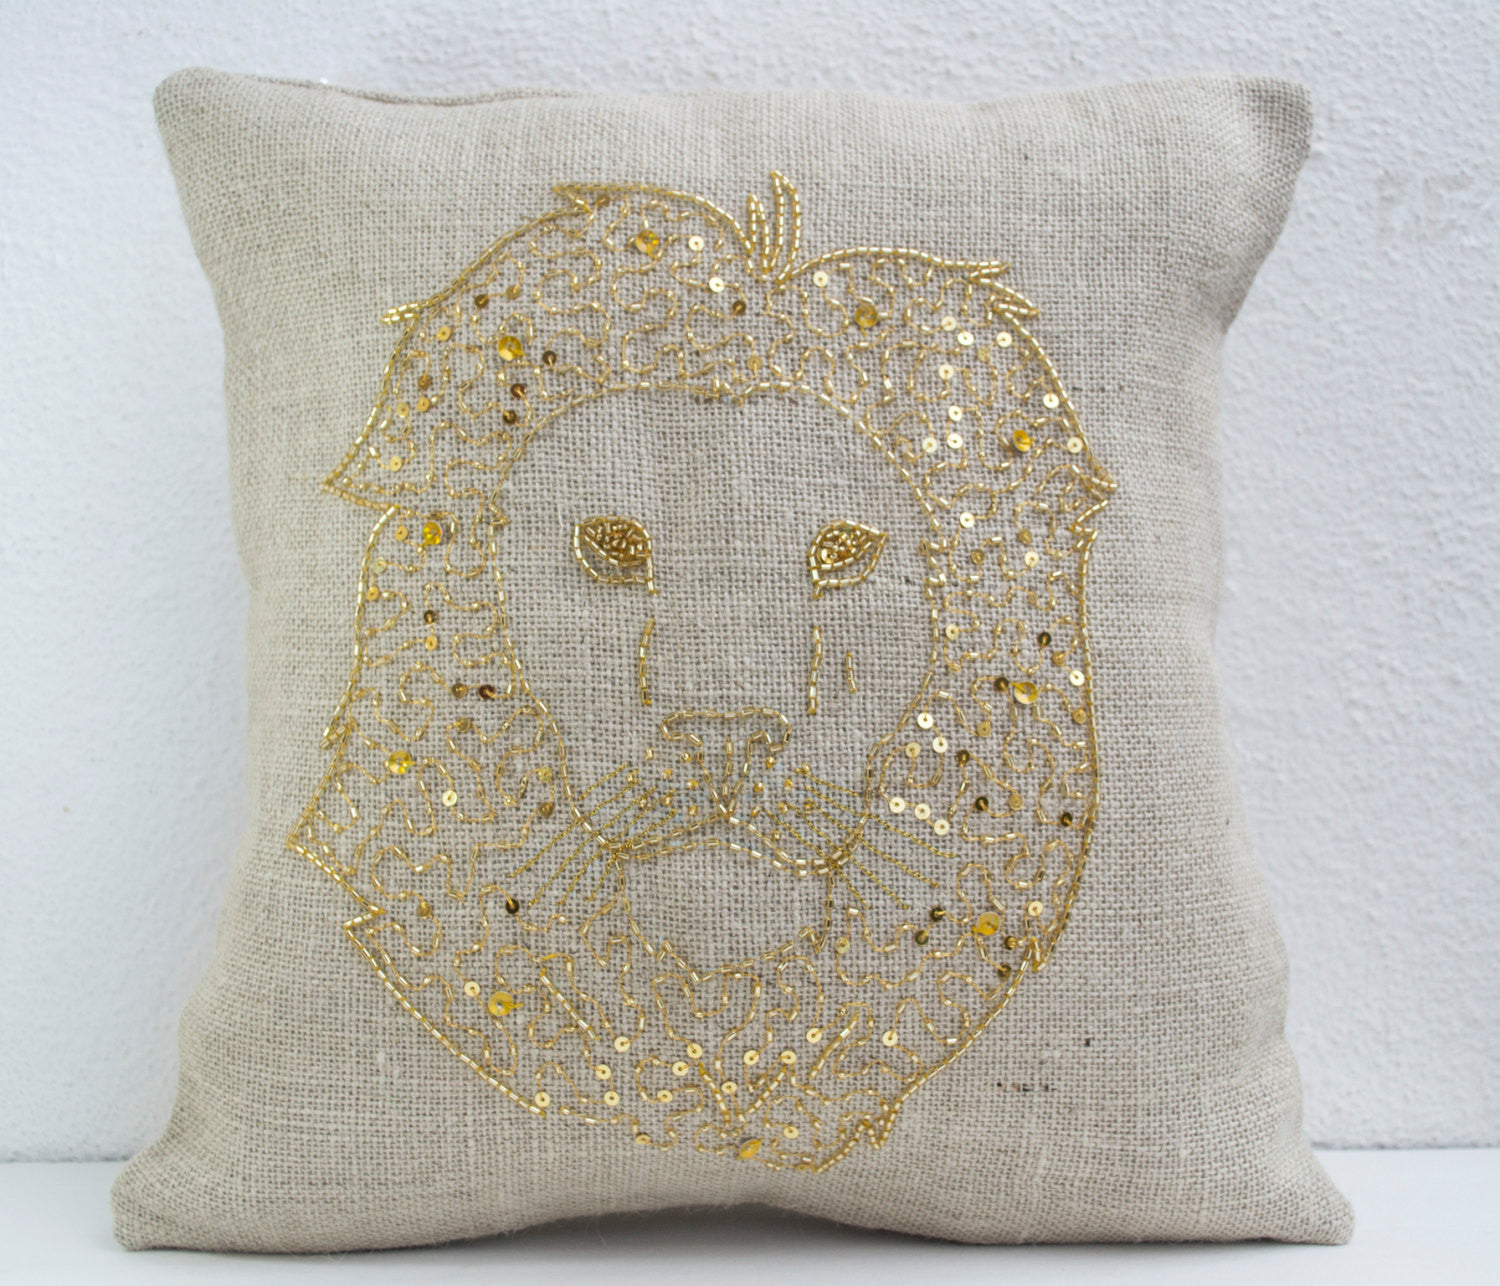 Wildlife pillow with embroidery and gold sequin